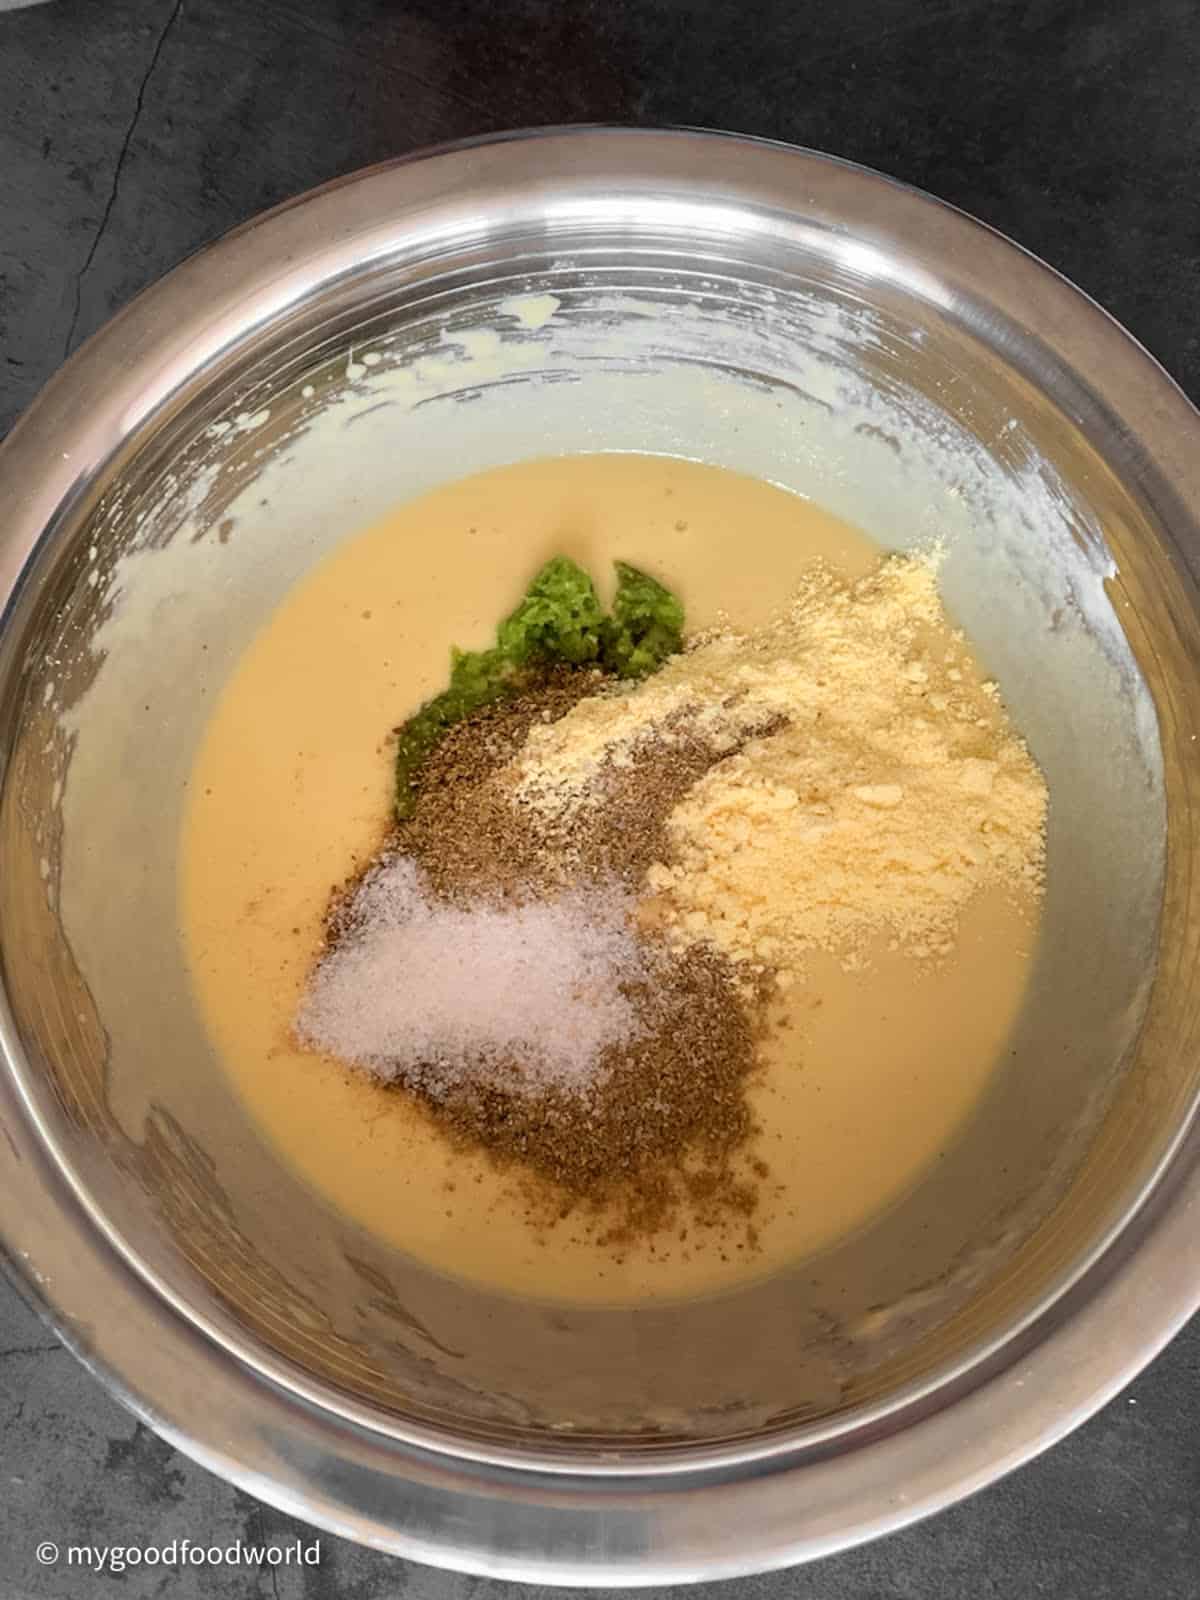 Powdered spices and salt placed in a heap on a yellow colored batter that has been smoothly whisked.